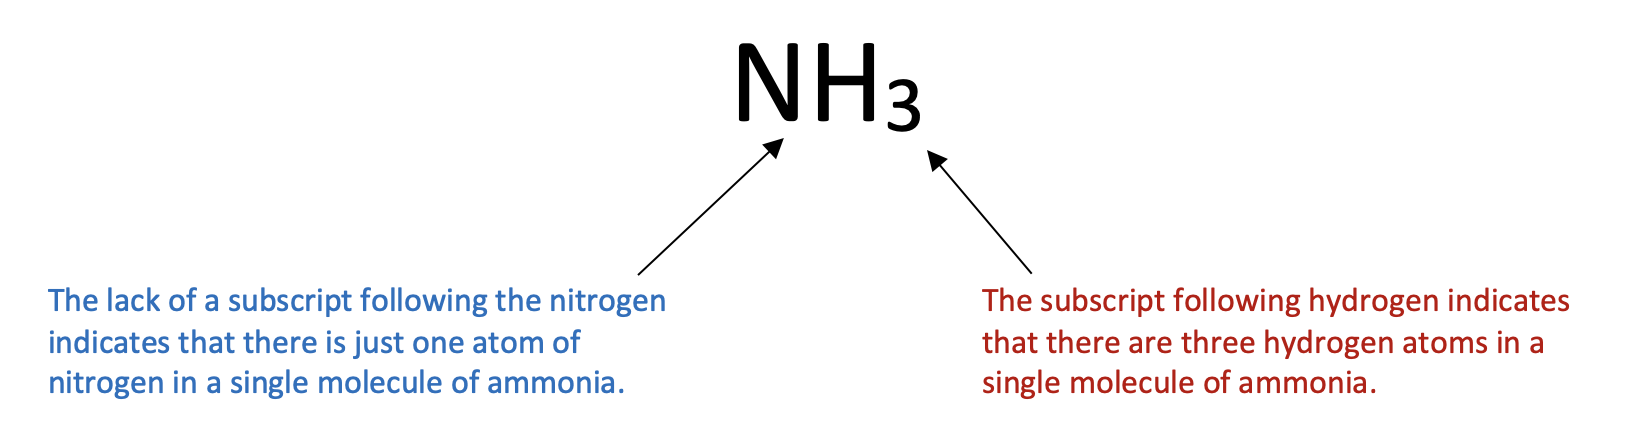 Molecular formula for ammonia: NH3. There is one atom of nitrogen, indicated by the lack of a subscript following the N, and 3 atoms of hydrogen, indicated by the 3 subscript following the H, in a molecule of ammonia. 